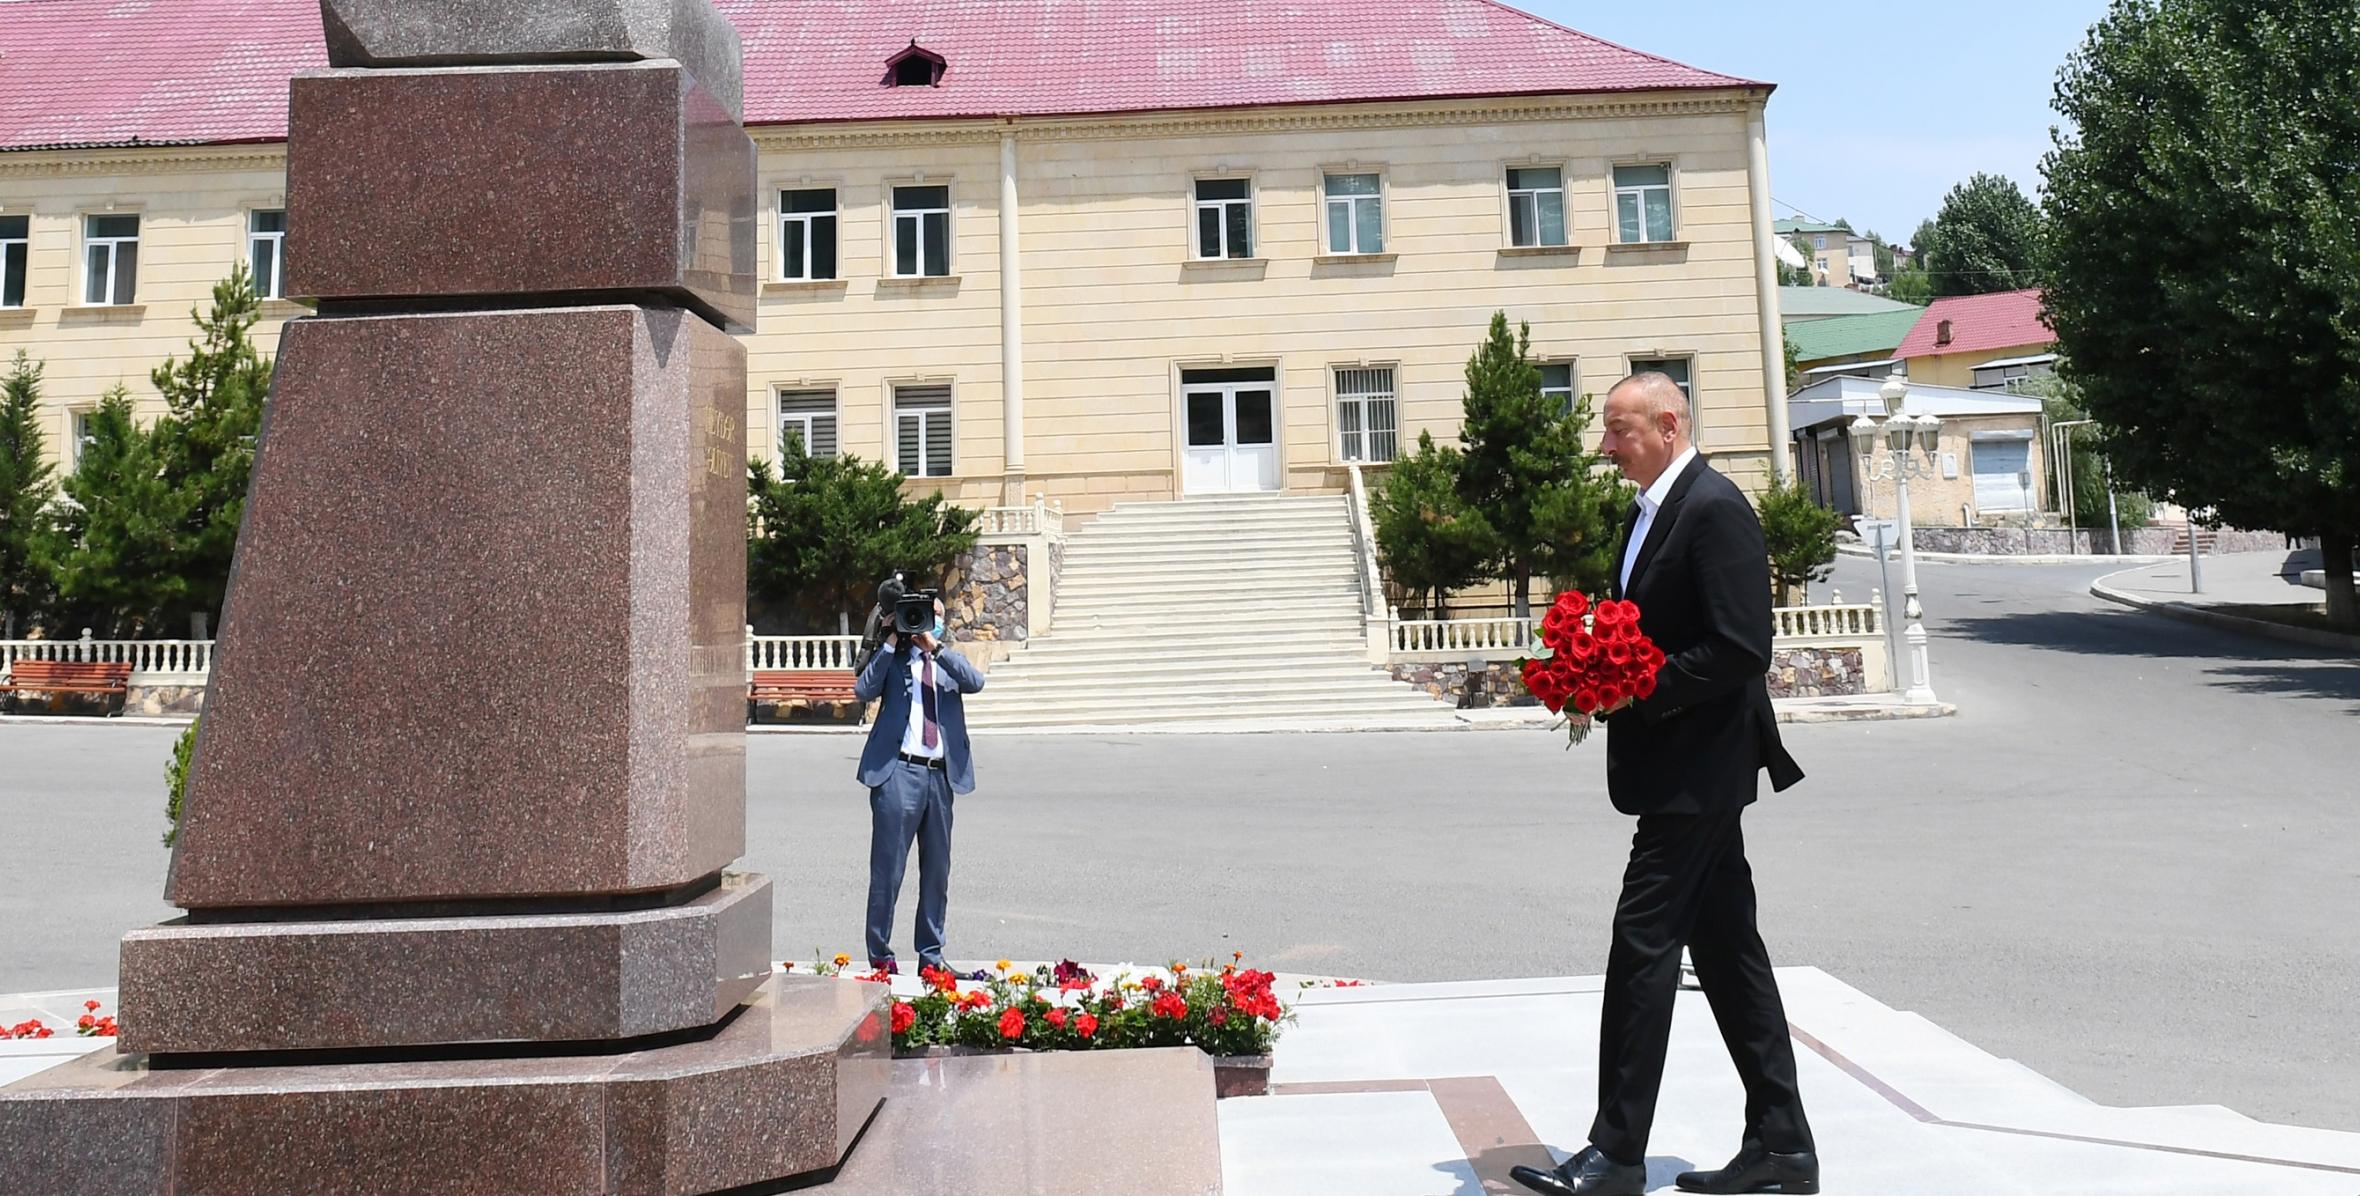 Ilham Aliyev has today arrived in Dashkasan district for a visit